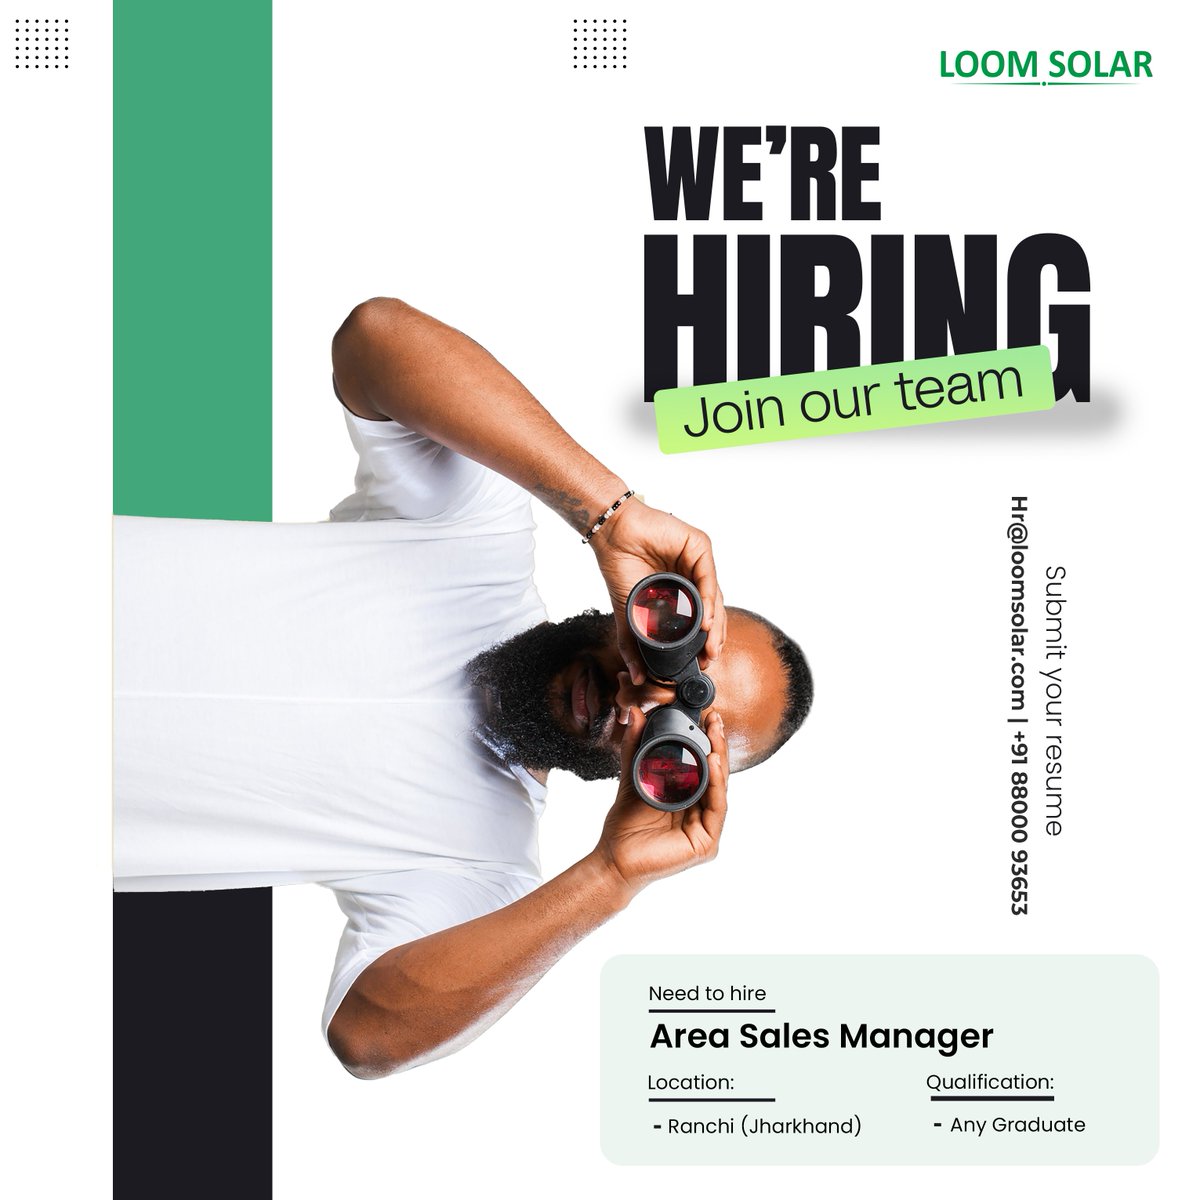 Join Our Amazing Team! As an Area Sales Manager at location Ranchi. Any graduate can apply for this post. How to apply: Interested professionals can send their updated CVs to Hr@loomsolar.com at +91-8800093653. #HiringNow #jobs #search #hire #hiring #successtip